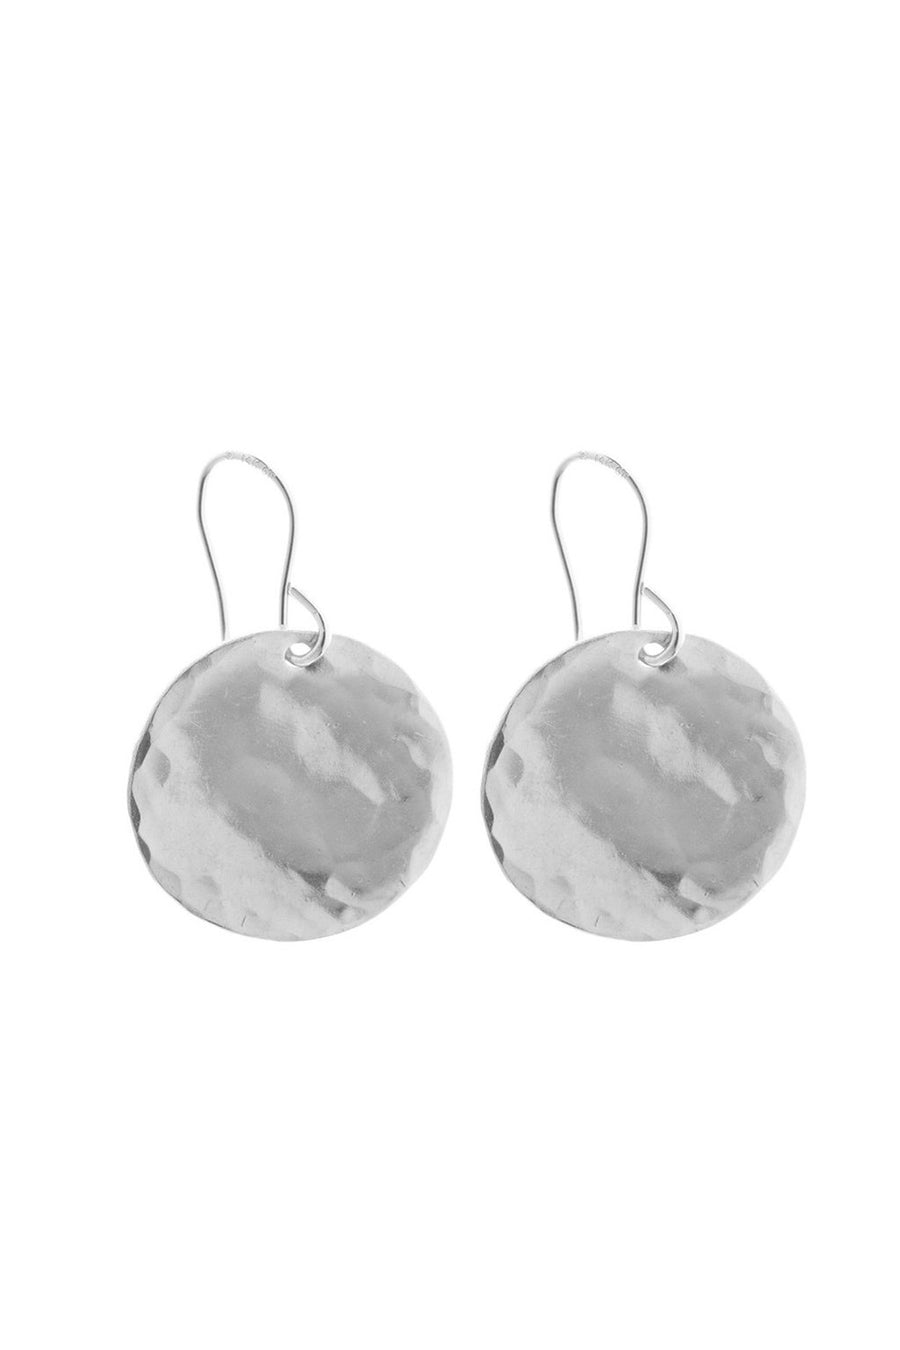 CLASSIC HAMMERED DISK EARRING SILVER - CrateExpectations